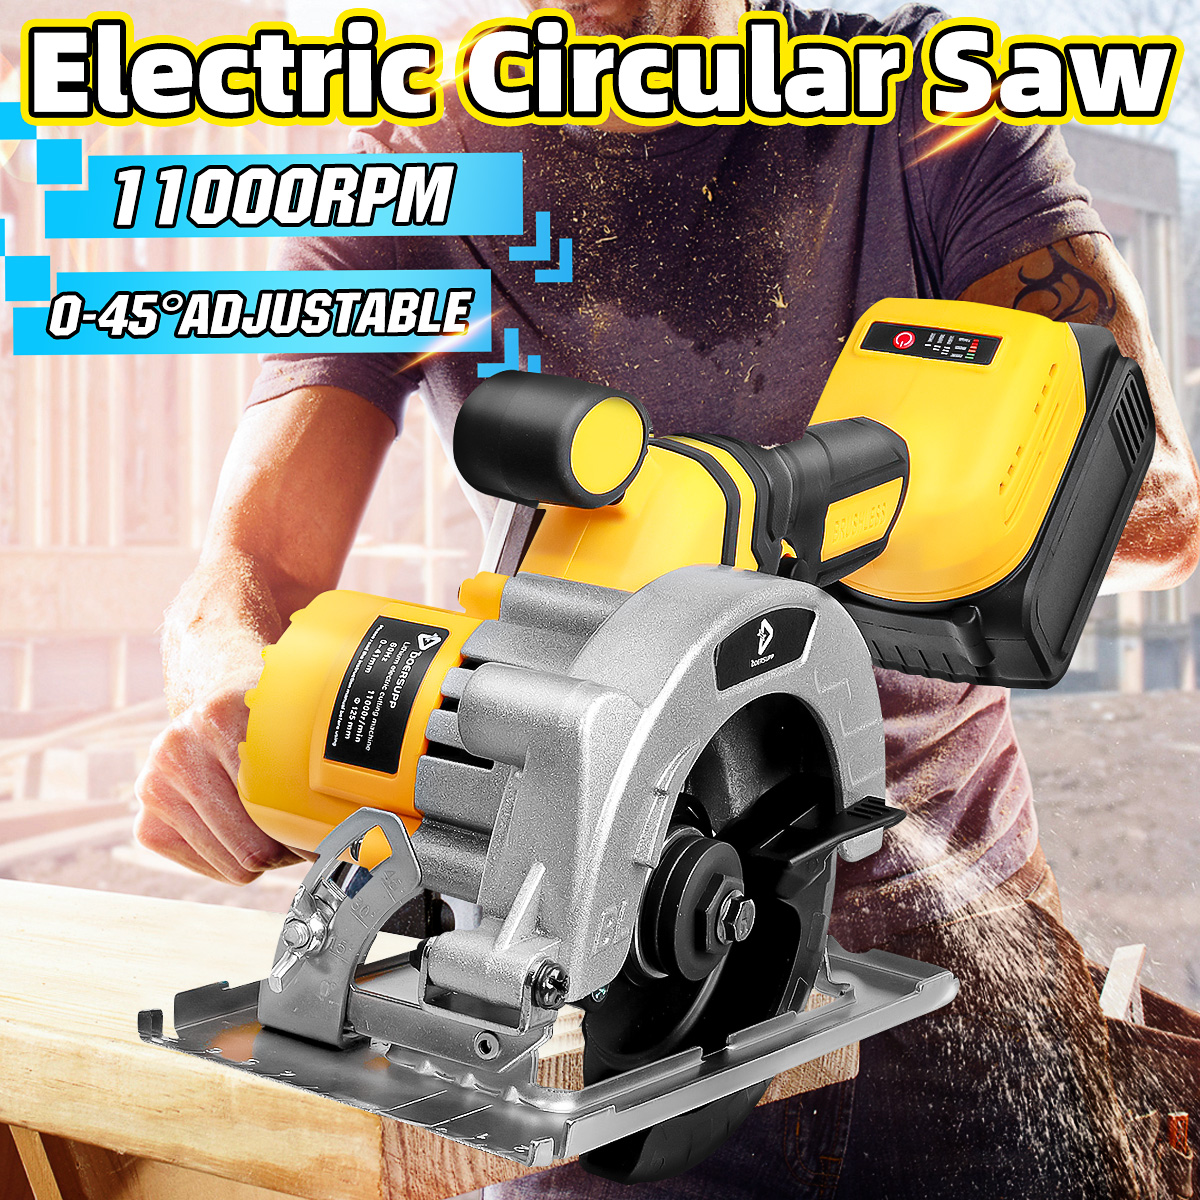 20V-125MM-Electric-Cordless-Brushless-Circular-Saw-Auxiliary-Handle-Household-Woodworking-Tools-DIY--1907960-1